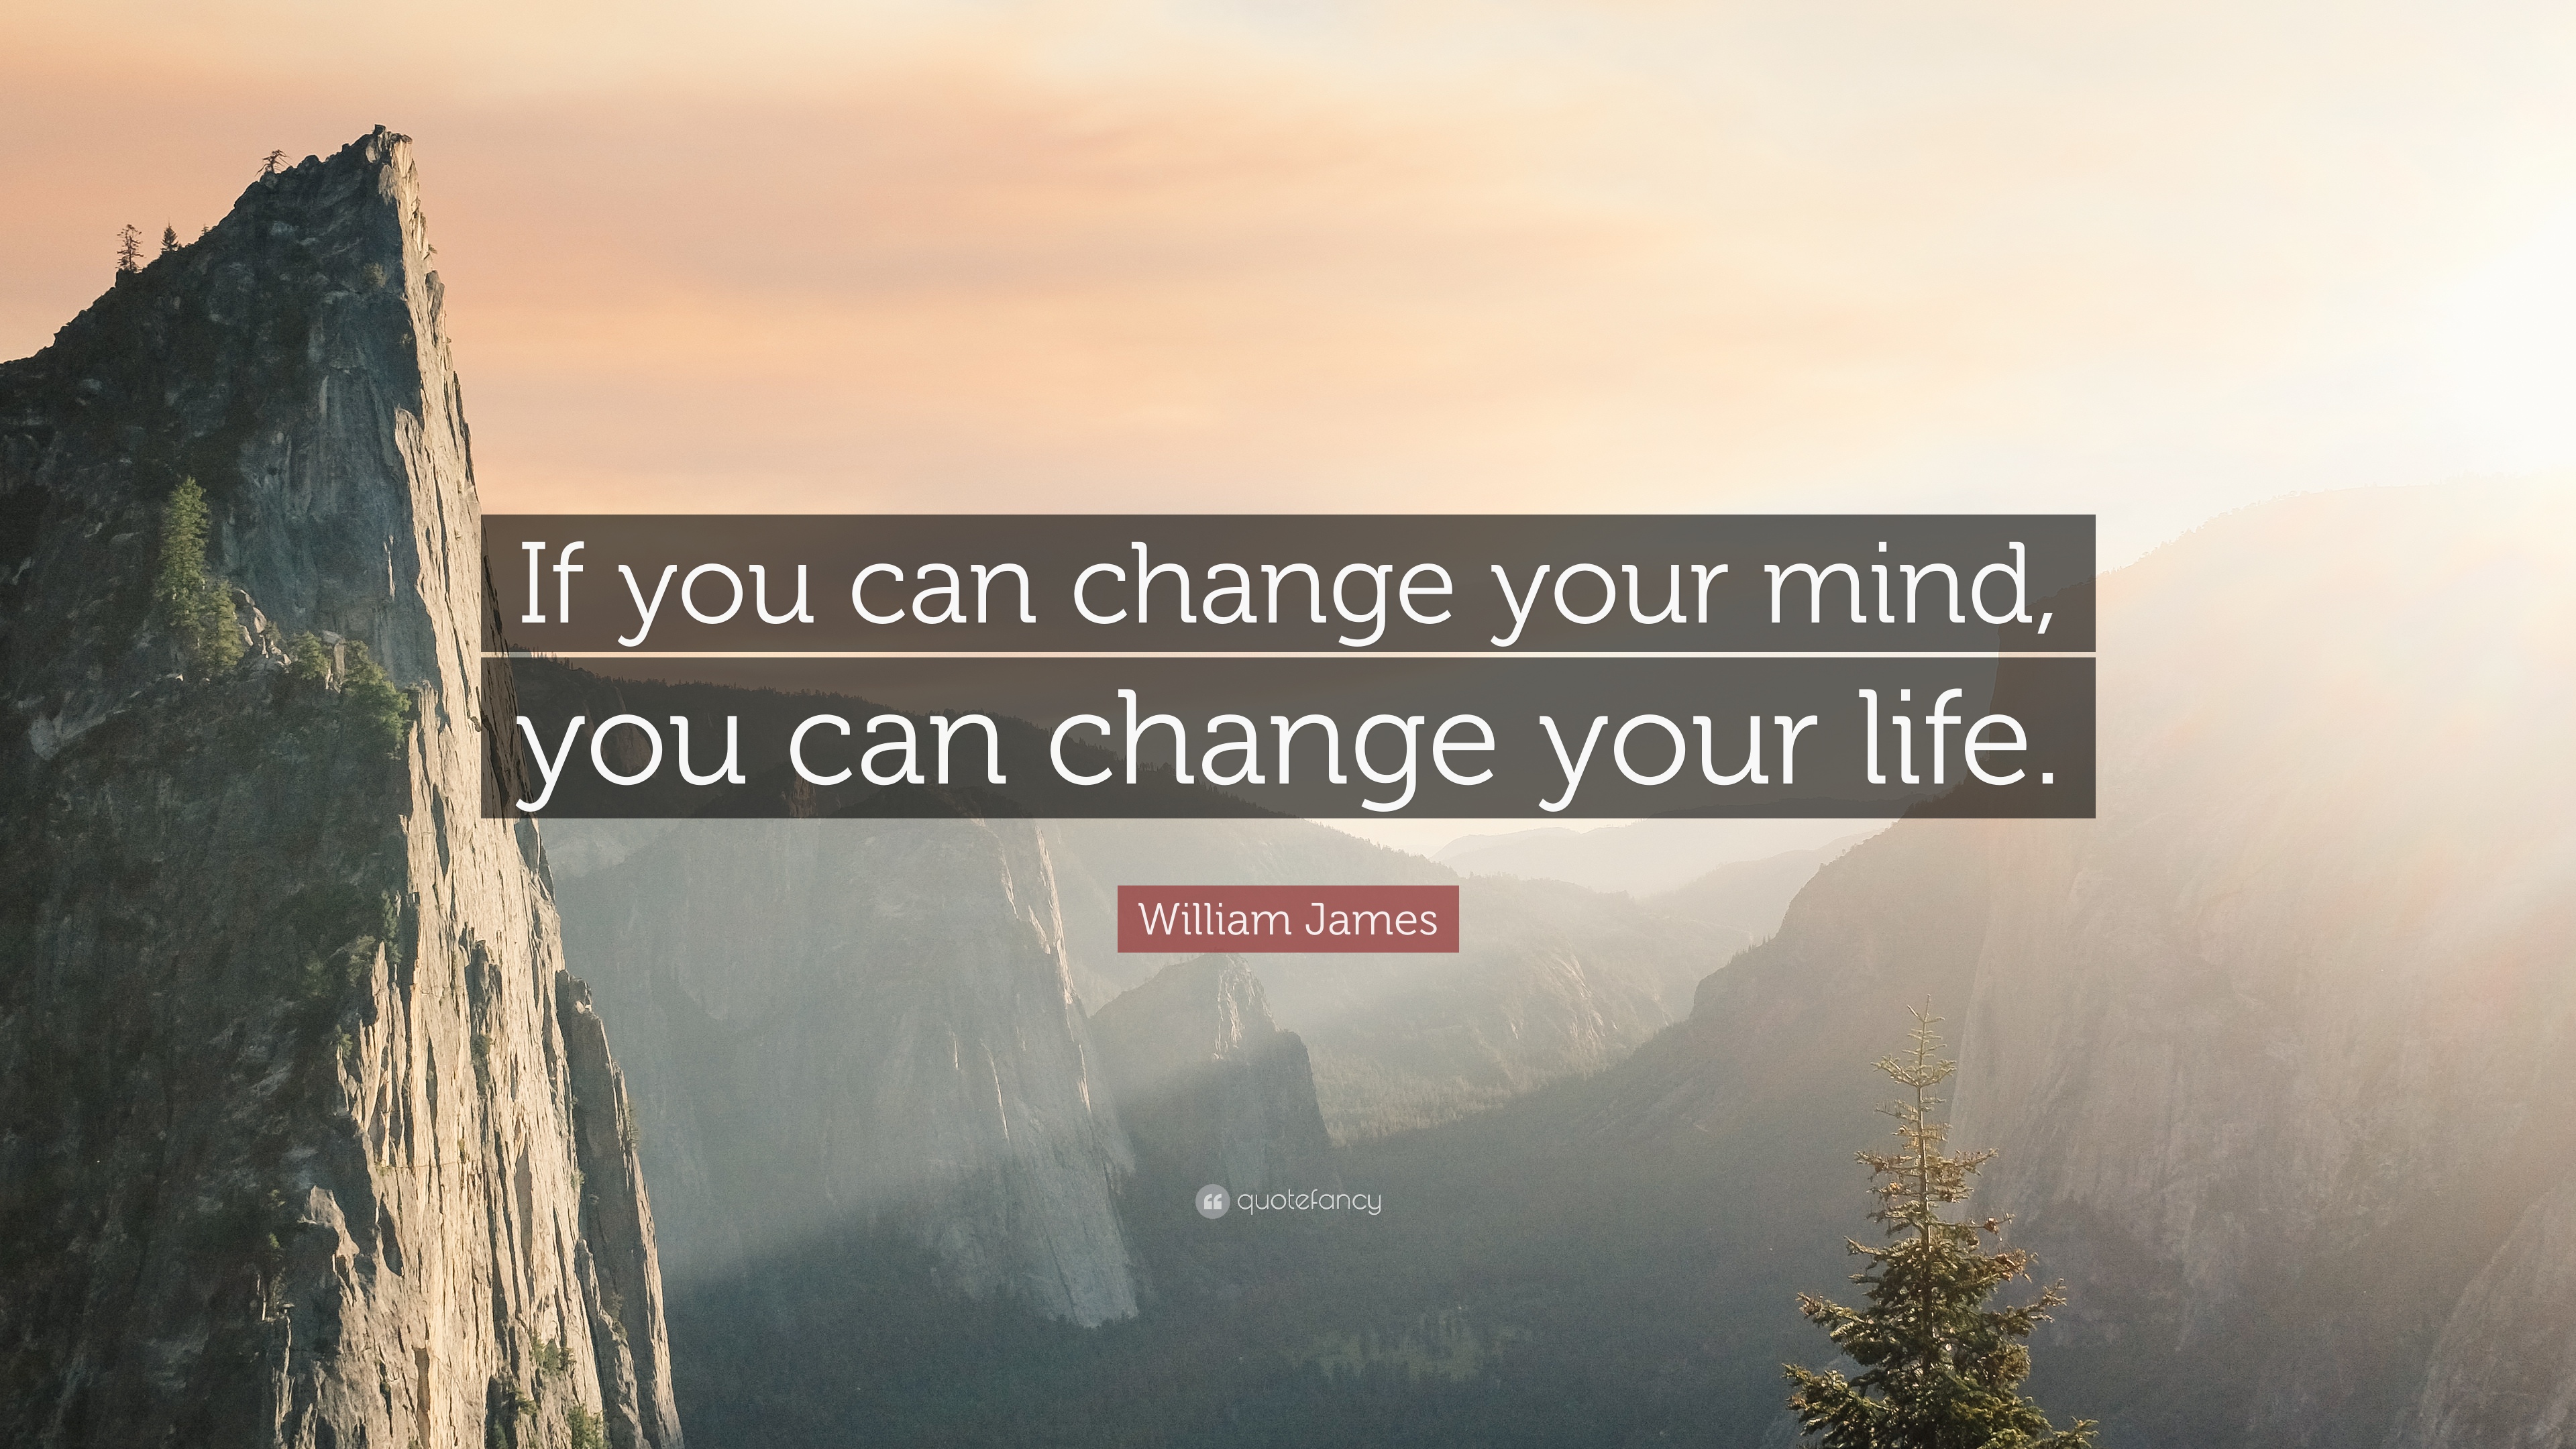 20920-William-James-Quote-If-you-can-change-your-mind-you-can-change.jpg